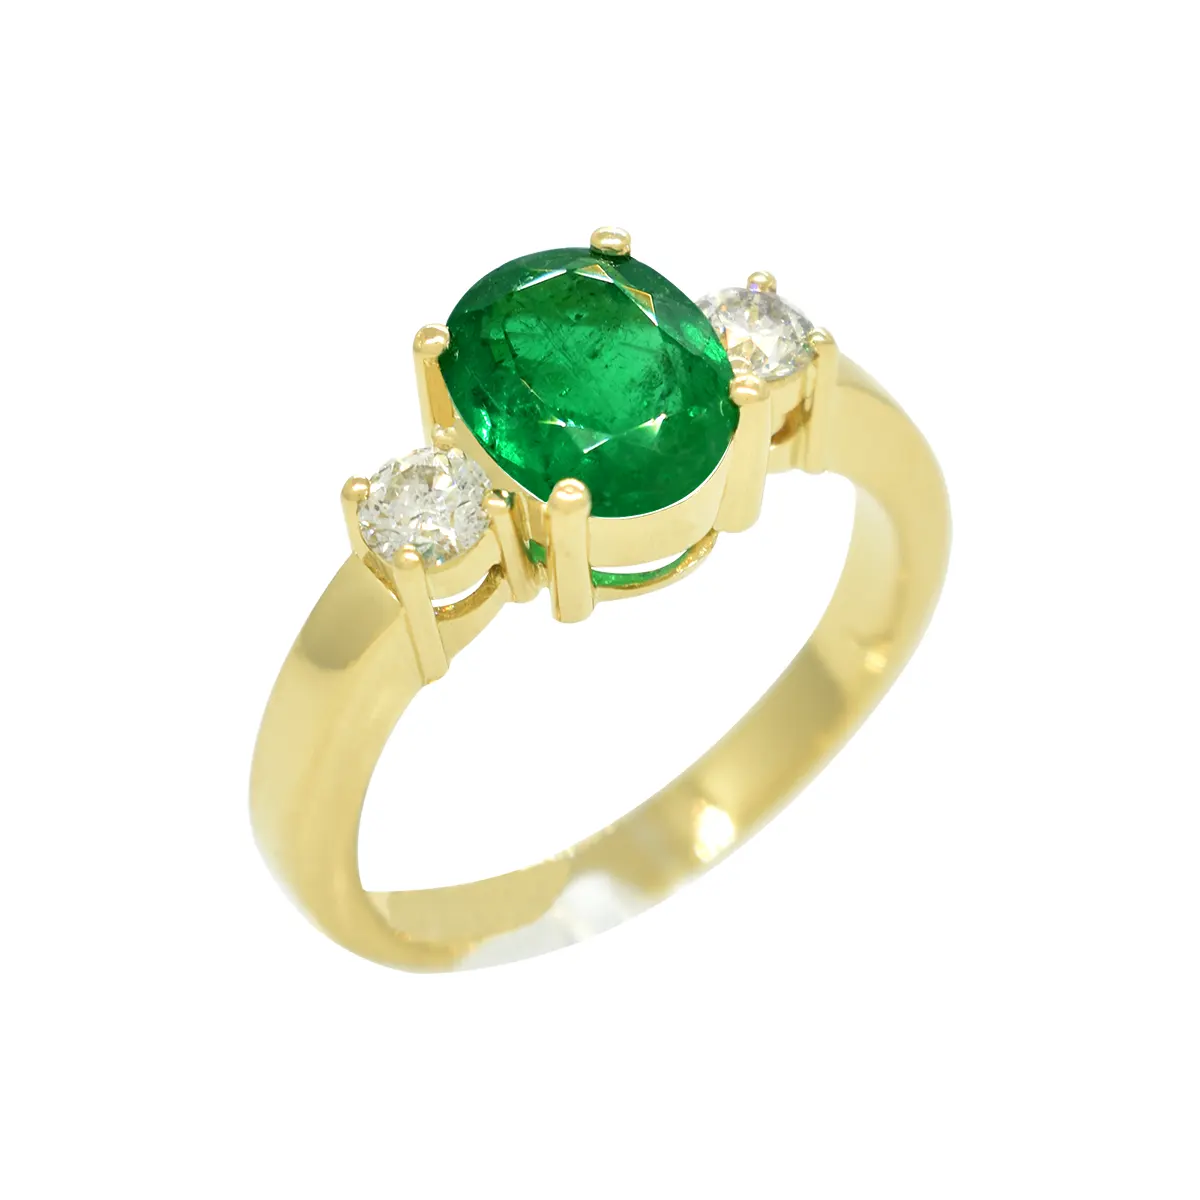 The centerpiece of the ring features a stunning oval-shaped natural Colombian emerald. These gems are renowned for their vibrant green color and exceptional quality